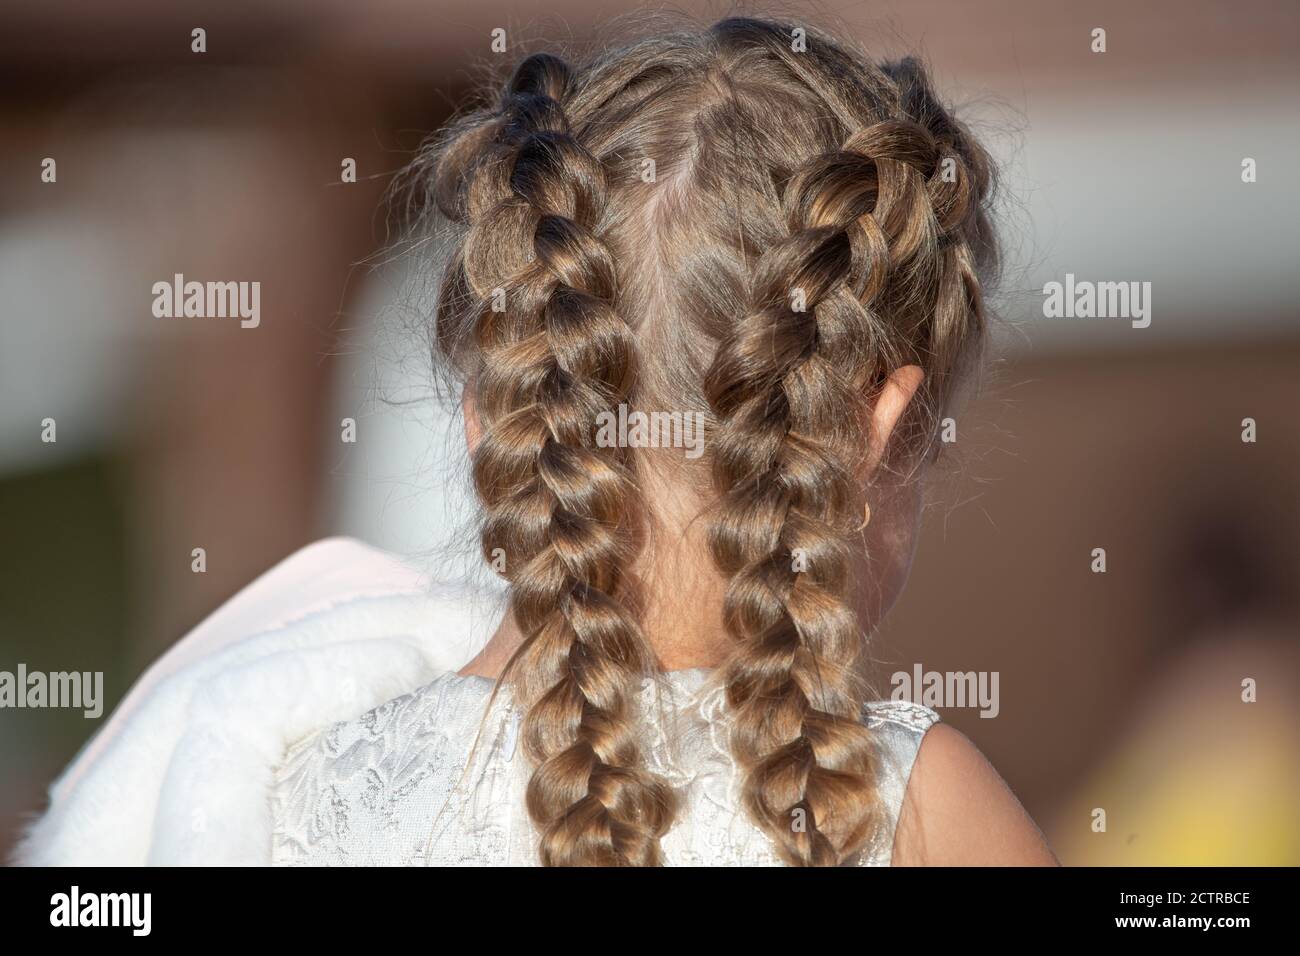 Hairstyle French braid inside out, on the head of a young girl. Stock Photo